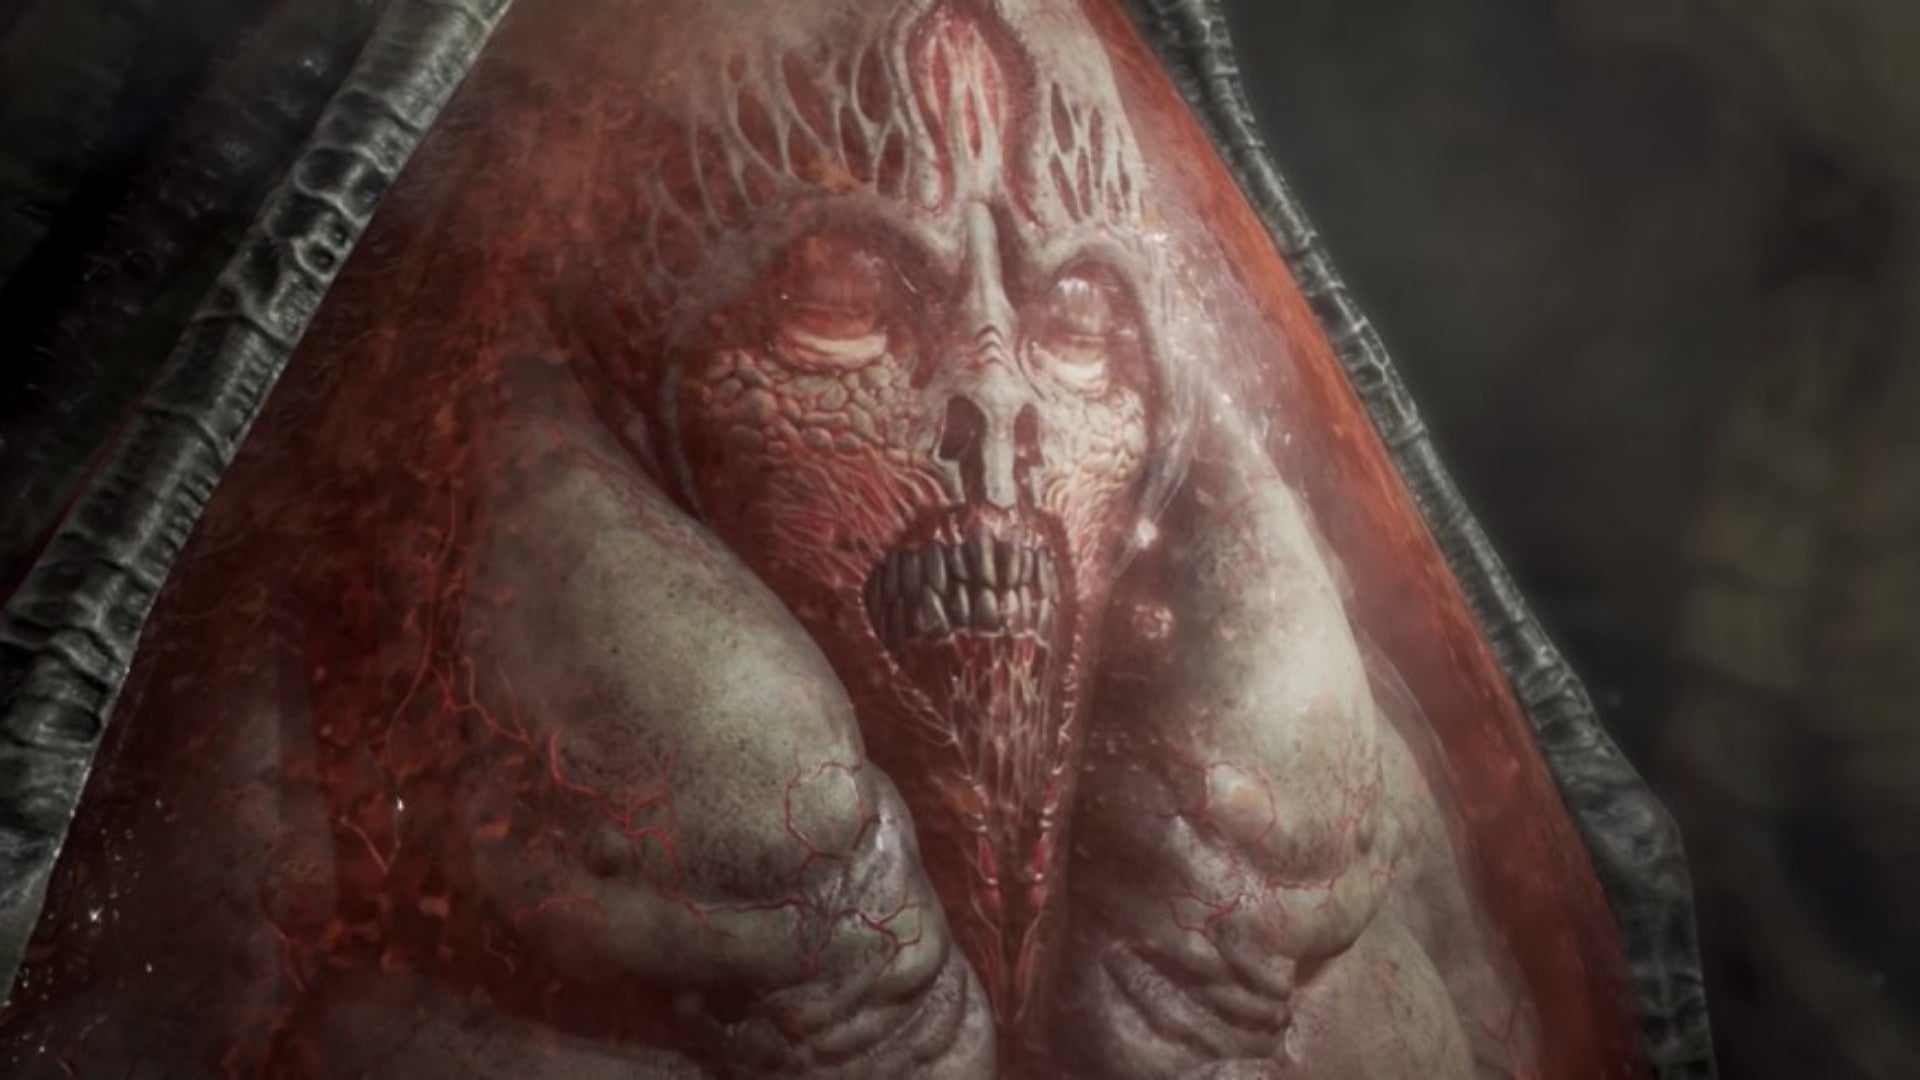 Image for Scorn's review scores hit scoreboard, might leave critics scorned - review round-up